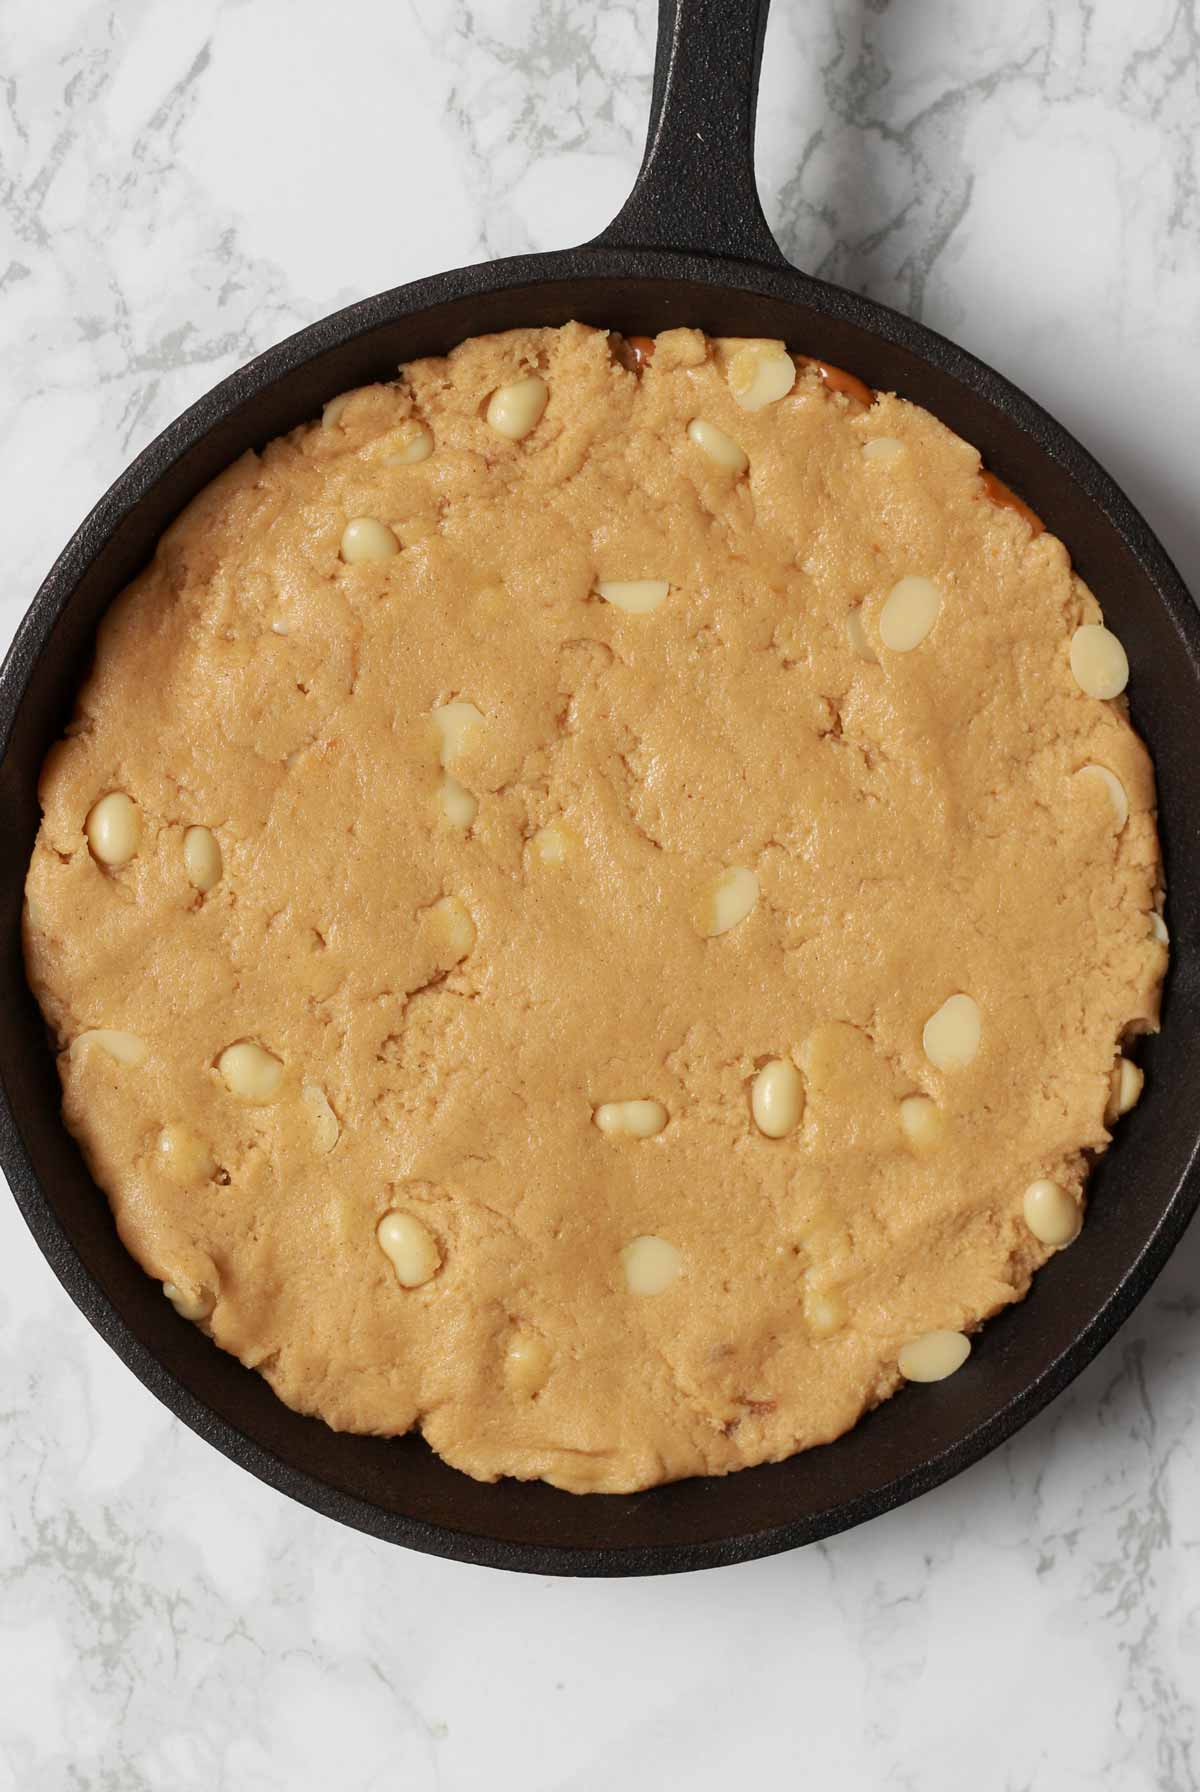 Unbaked Dough In Skillet